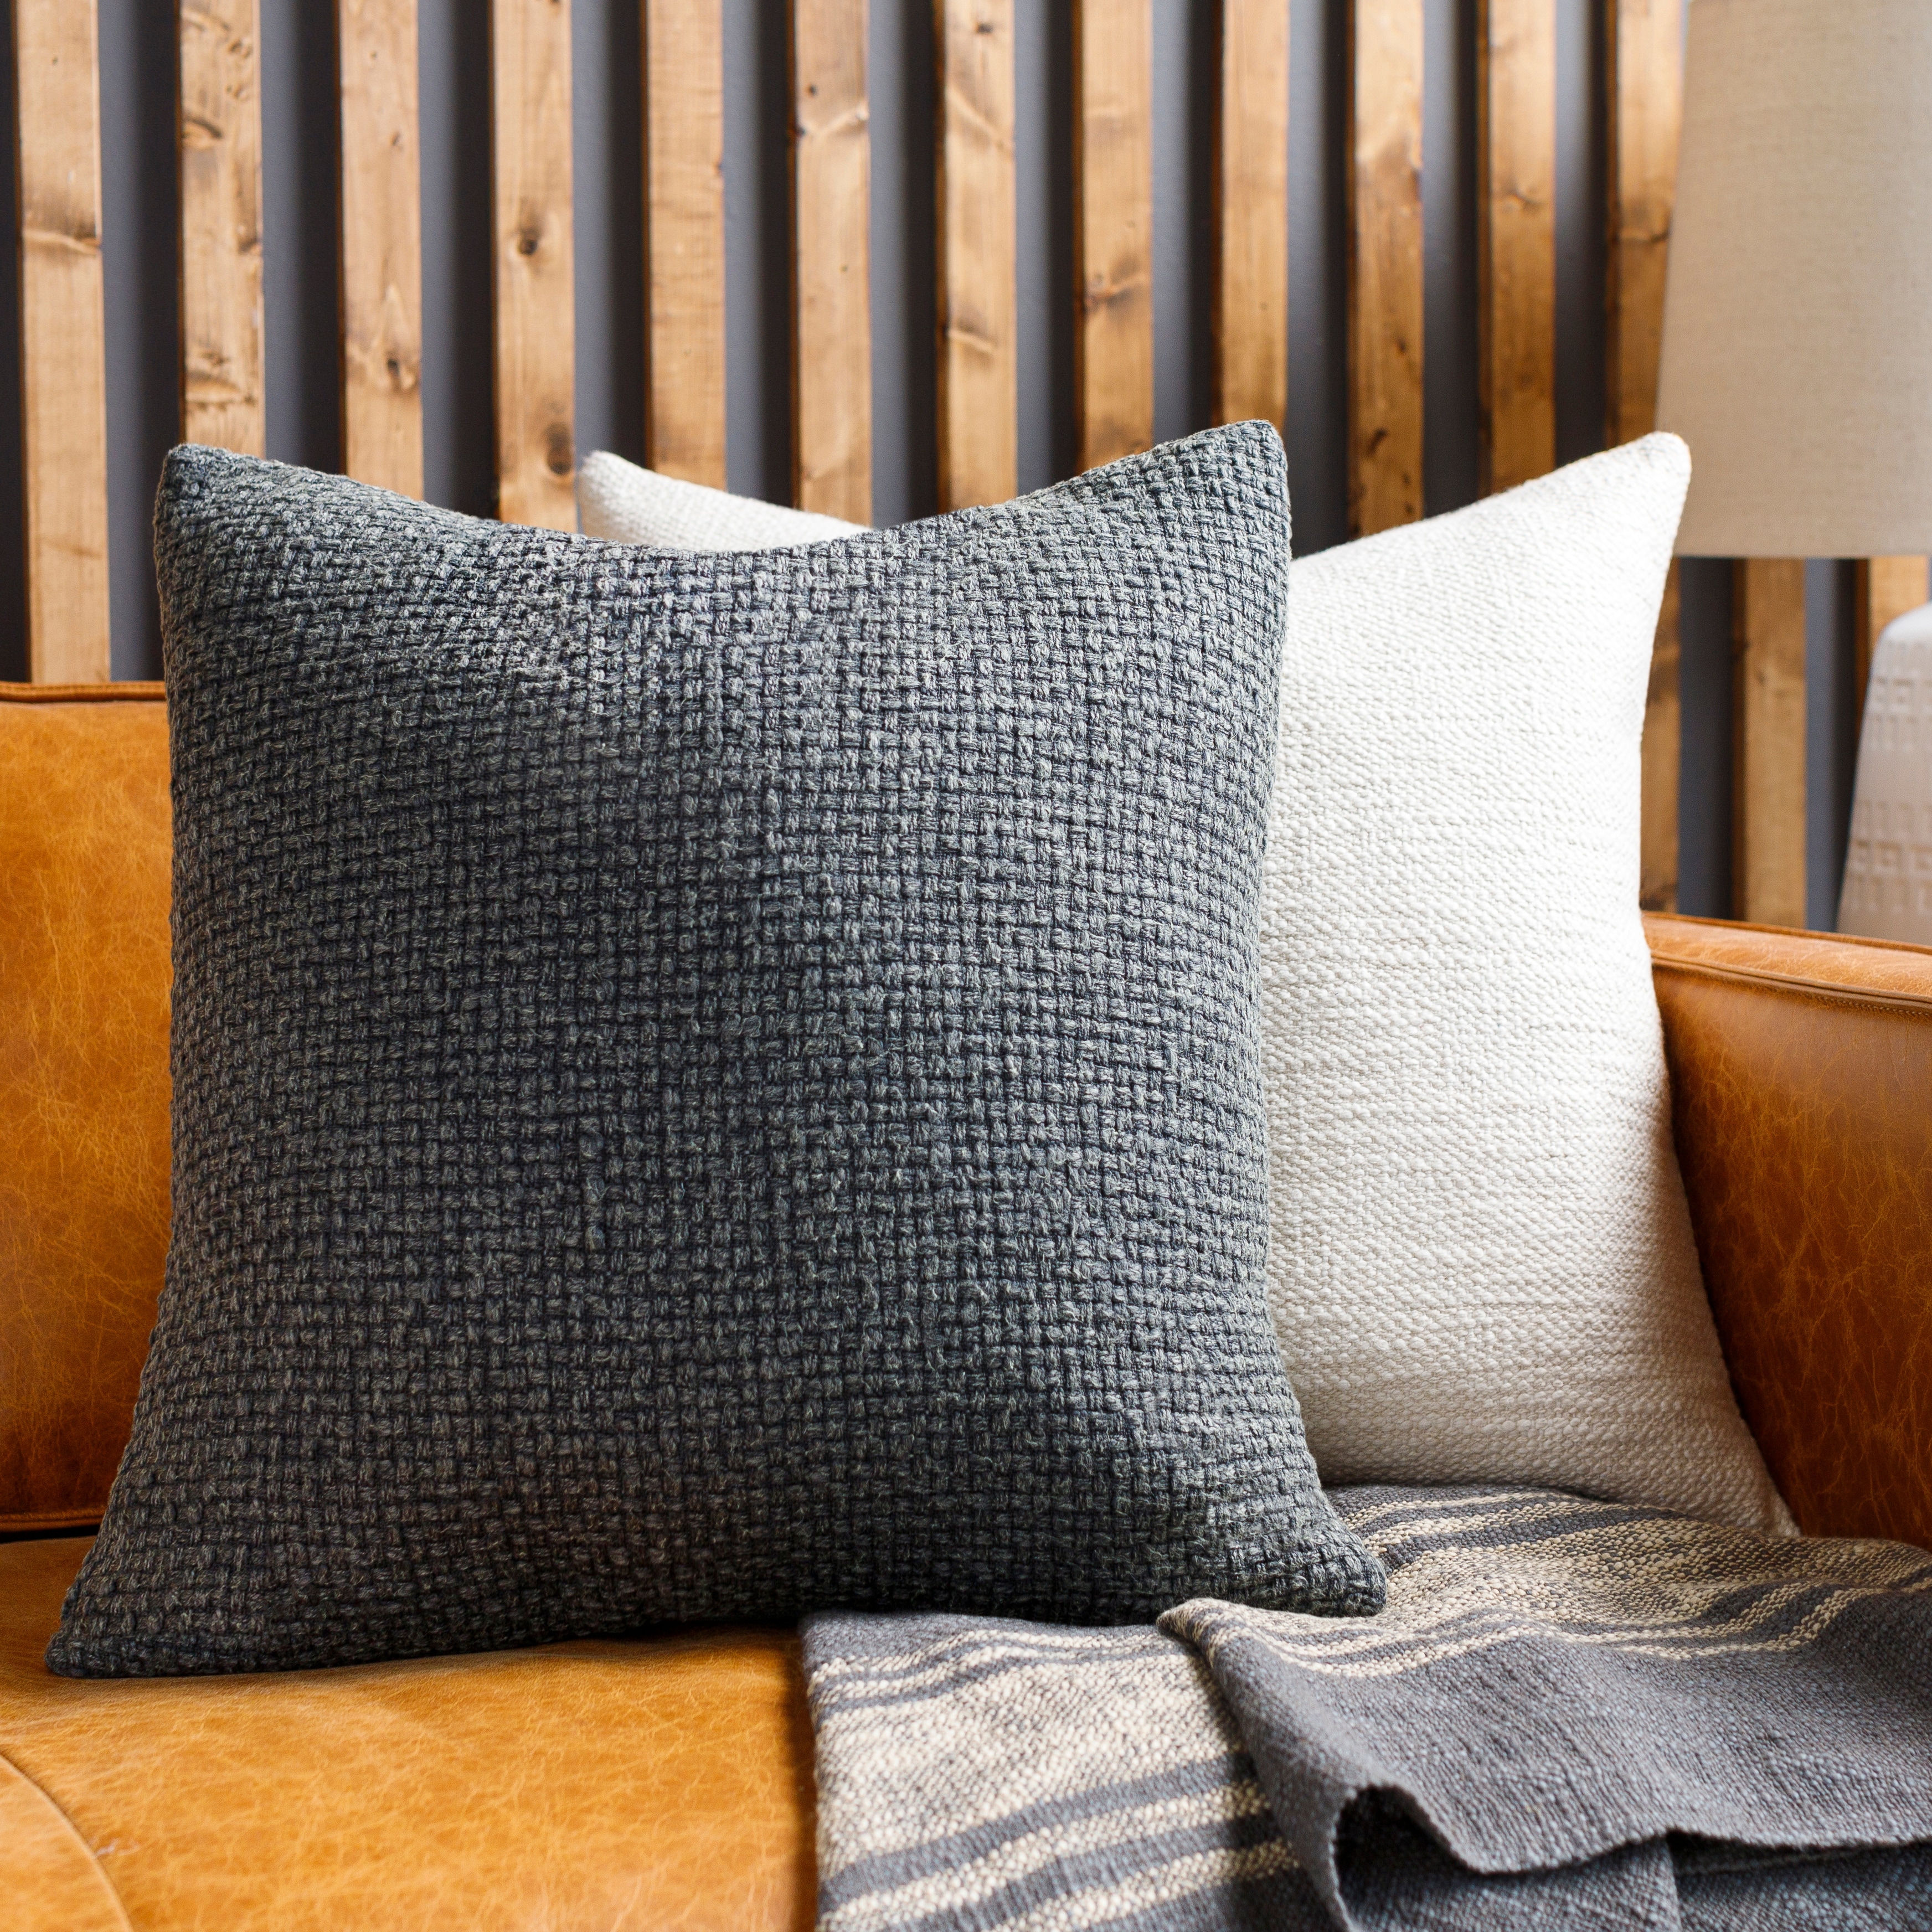 https://ak1.ostkcdn.com/images/products/is/images/direct/0ff4a828d89bf34df8a191e271fbe27f435d7e2f/Terry-Farmhouse-Textured-Cozy-Throw-Pillow.jpg